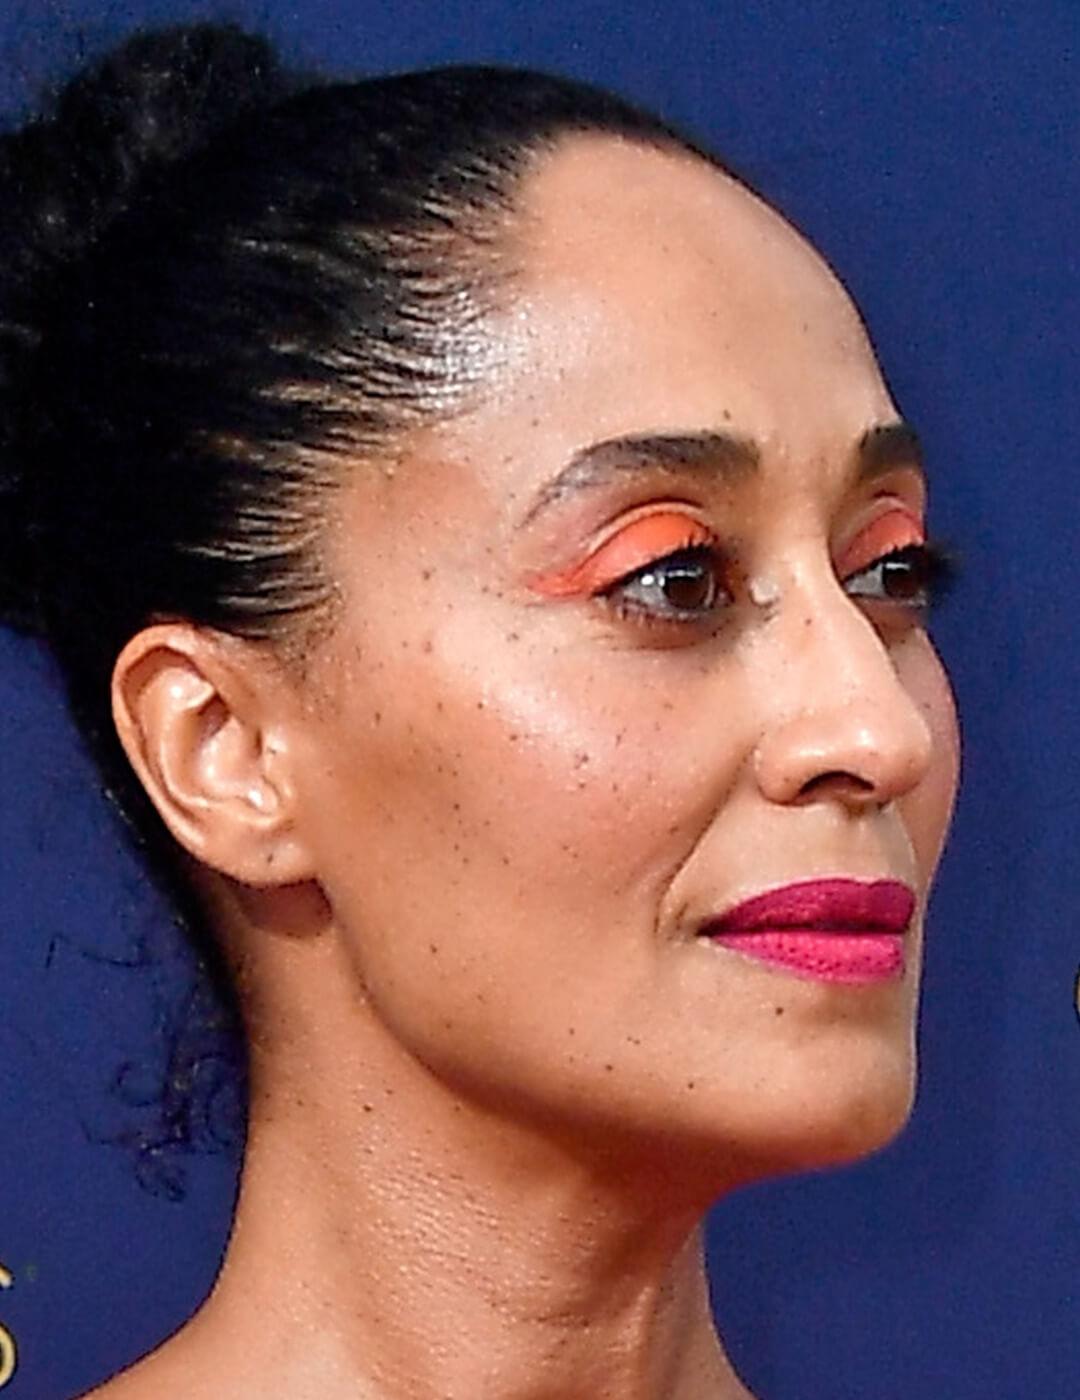 A photo of Tracee Ellis Ross with a neon orange eyeshadow and bold red lipstick